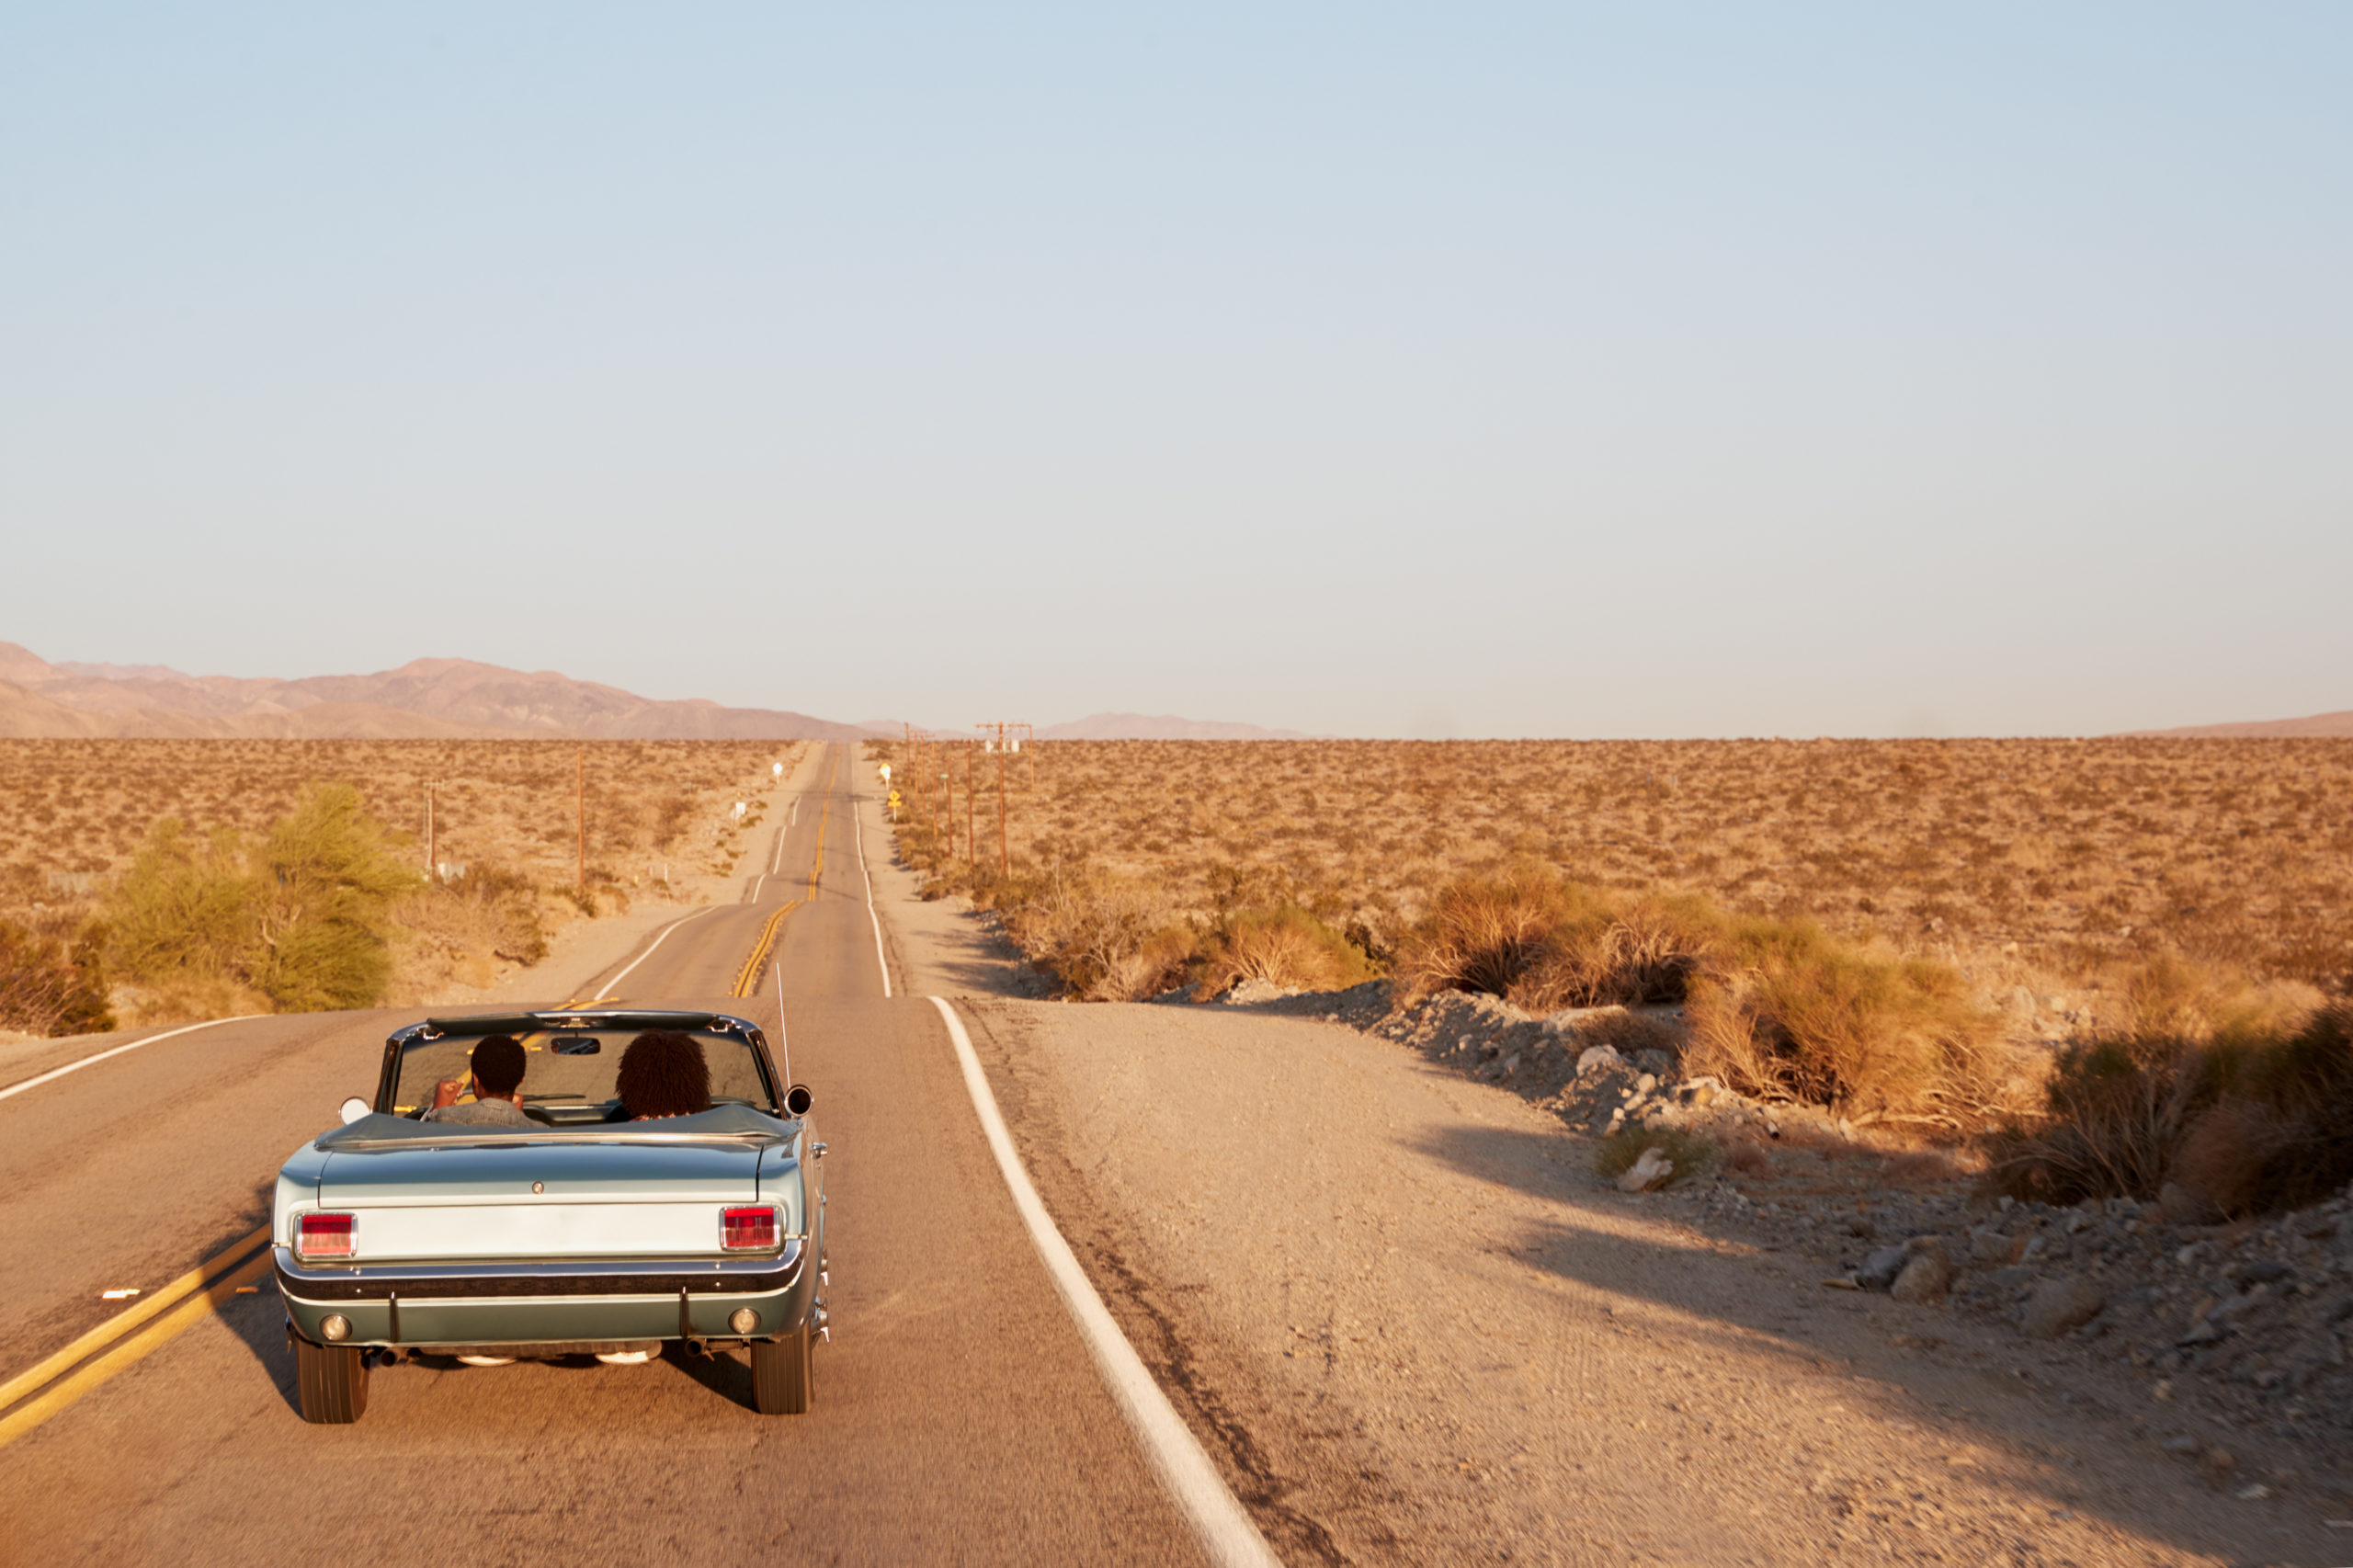 Couple taking a road trip through the desert in a convertible